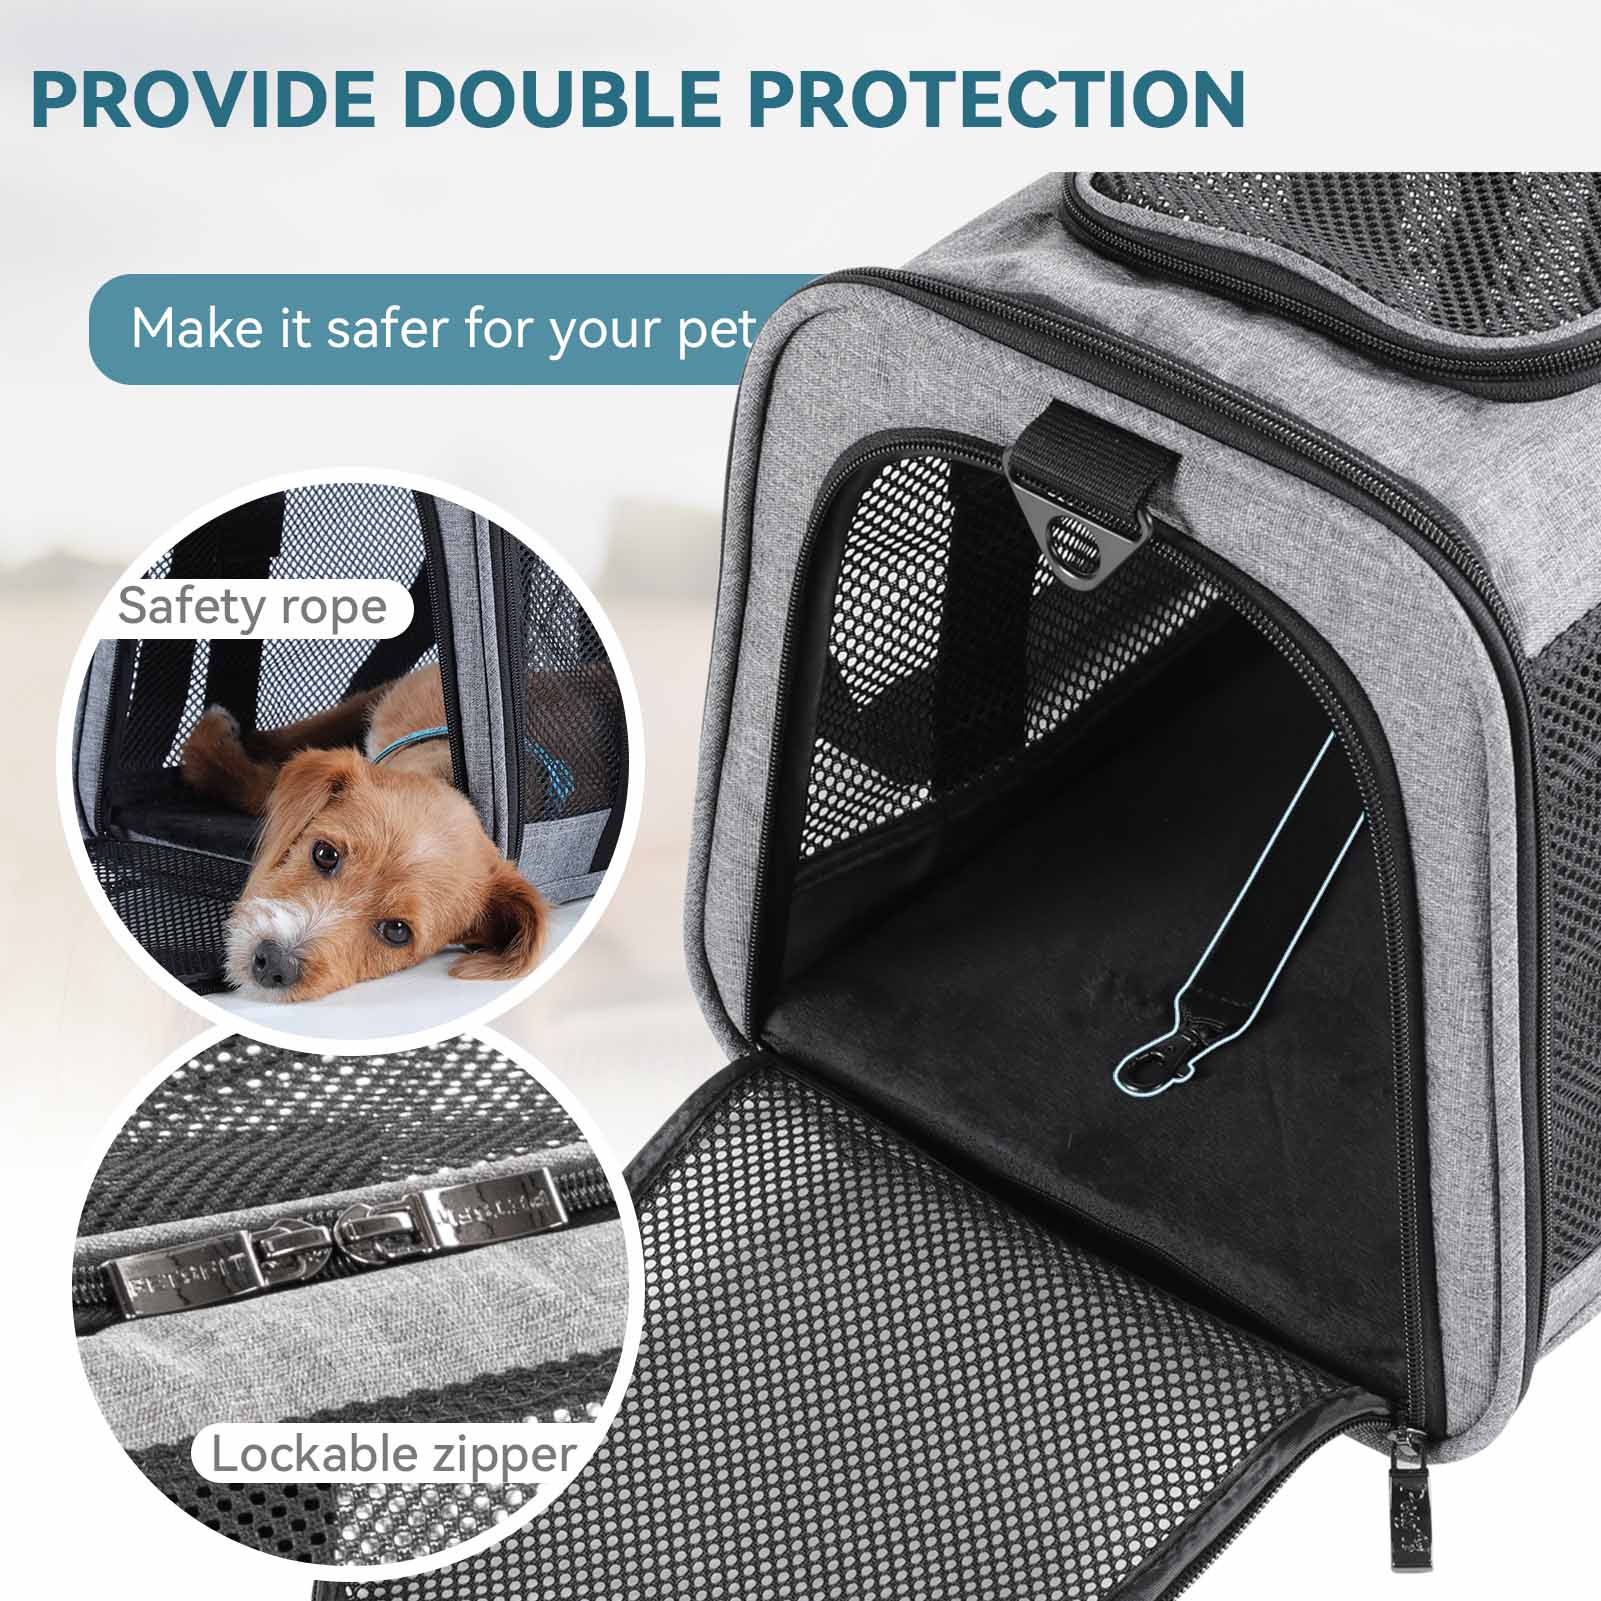 Petsfit 19X12 X12 Expandable Cat Dog Carrier for Small Medium Cat Or  Puppy Up to 20 Pounds, Square Extension Add More Space, Washable Soft Pet